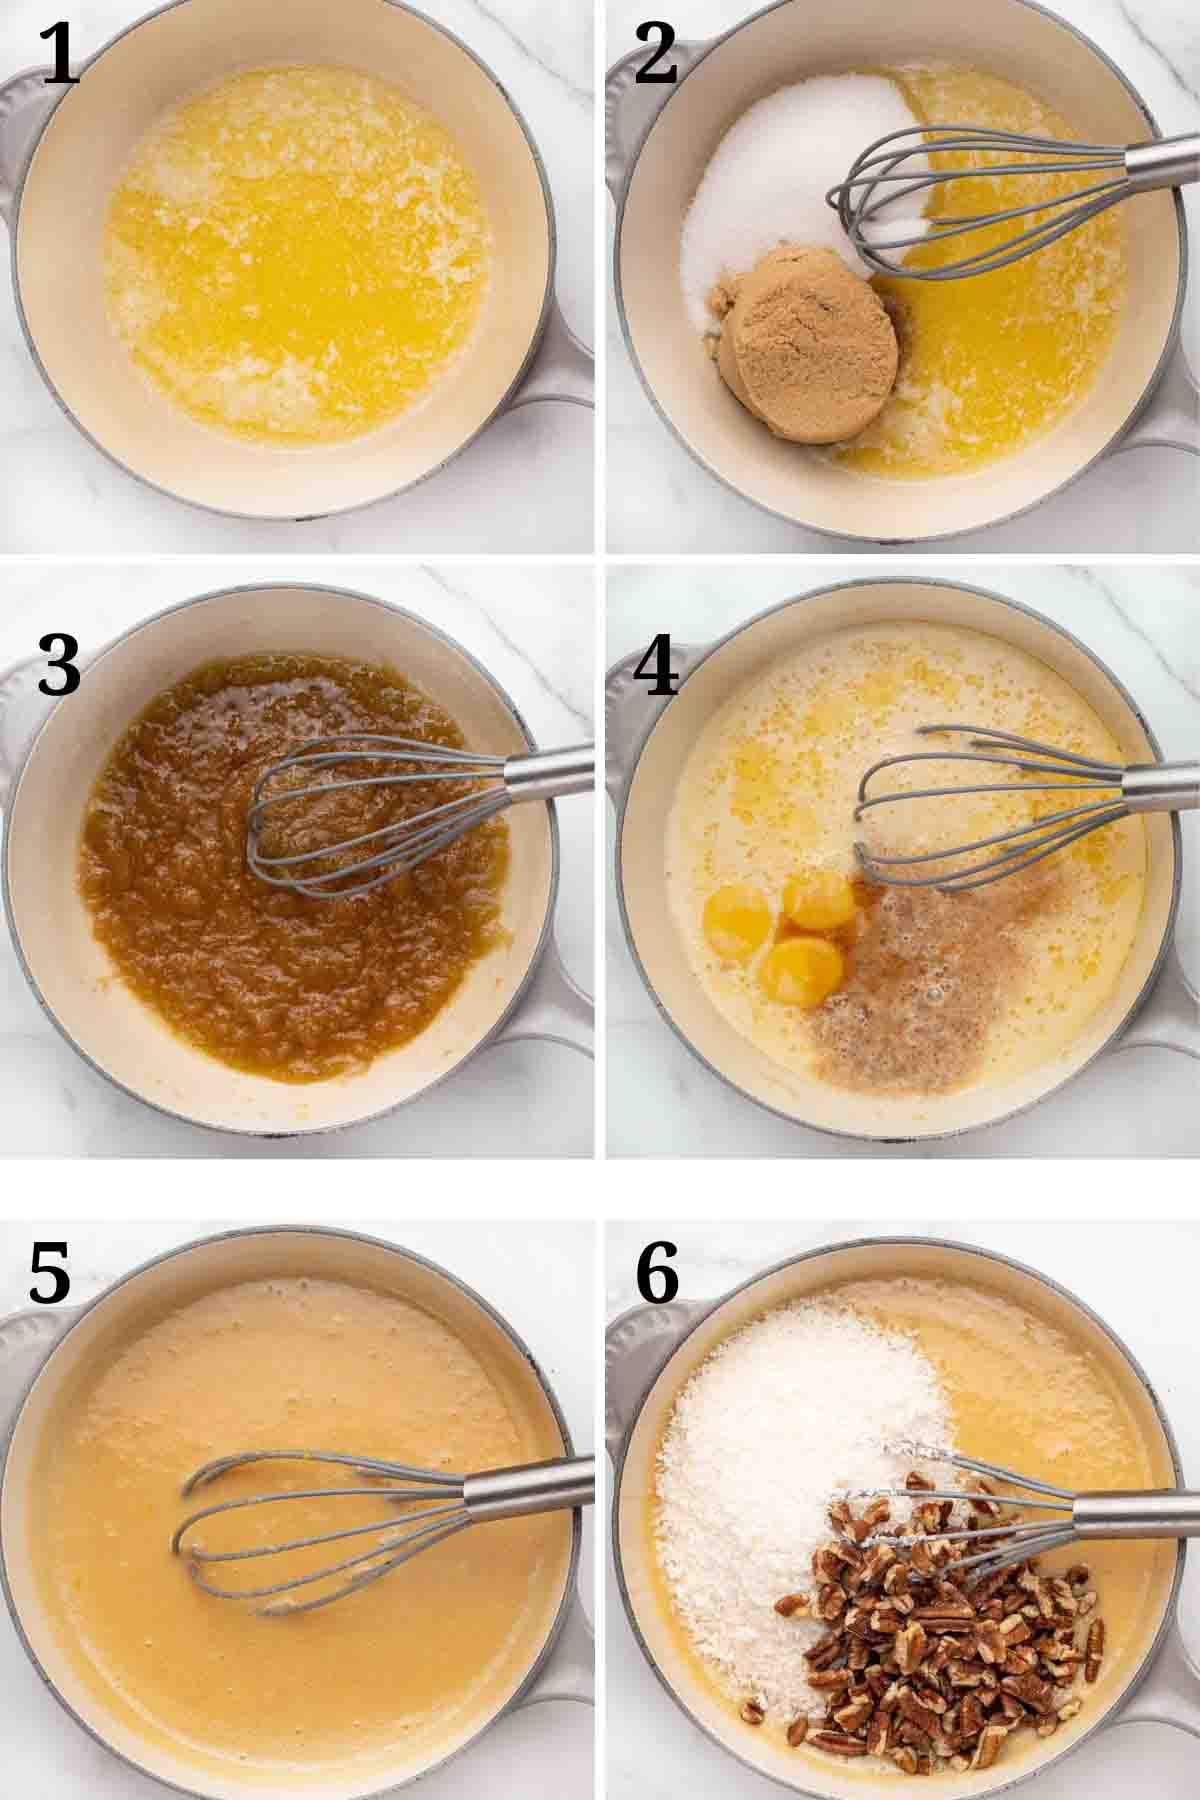 six images showing how to make a german chocolate frosting